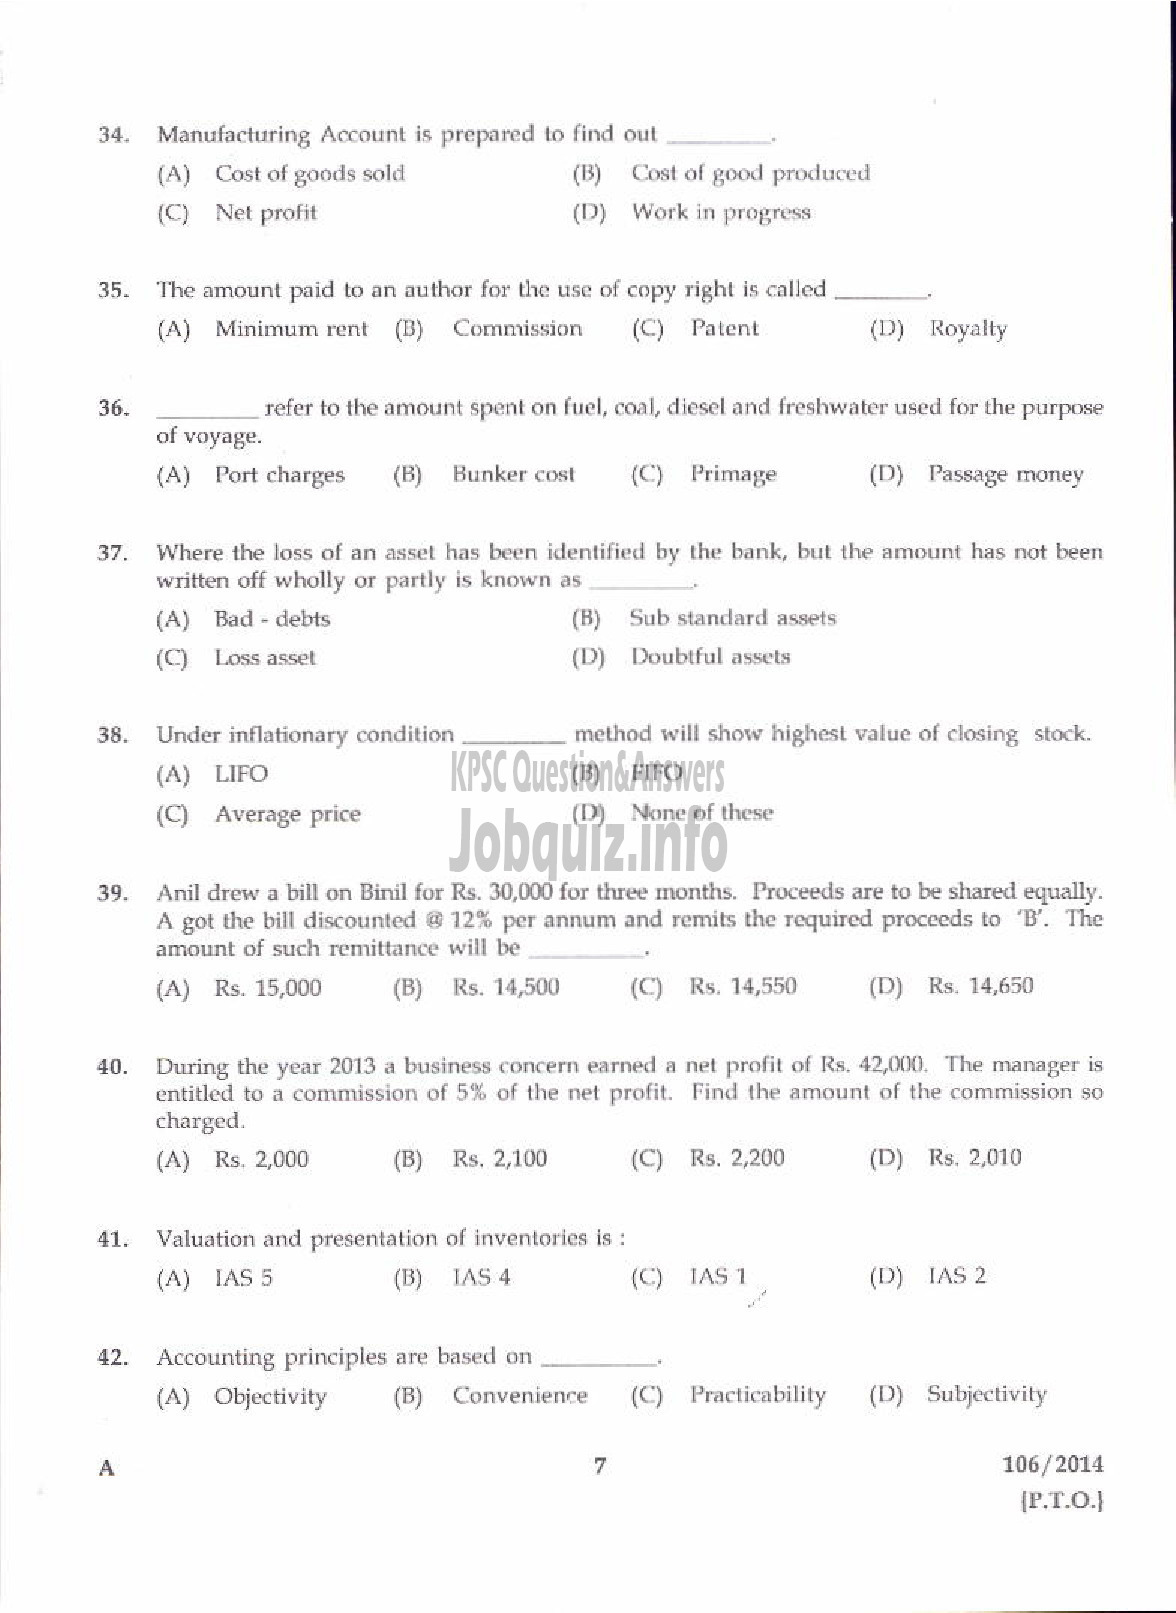 Kerala PSC Question Paper - DIVISIONAL ACCOUNTANT KERALA WATER AUTHORITY PRELIMINARY TEST-5